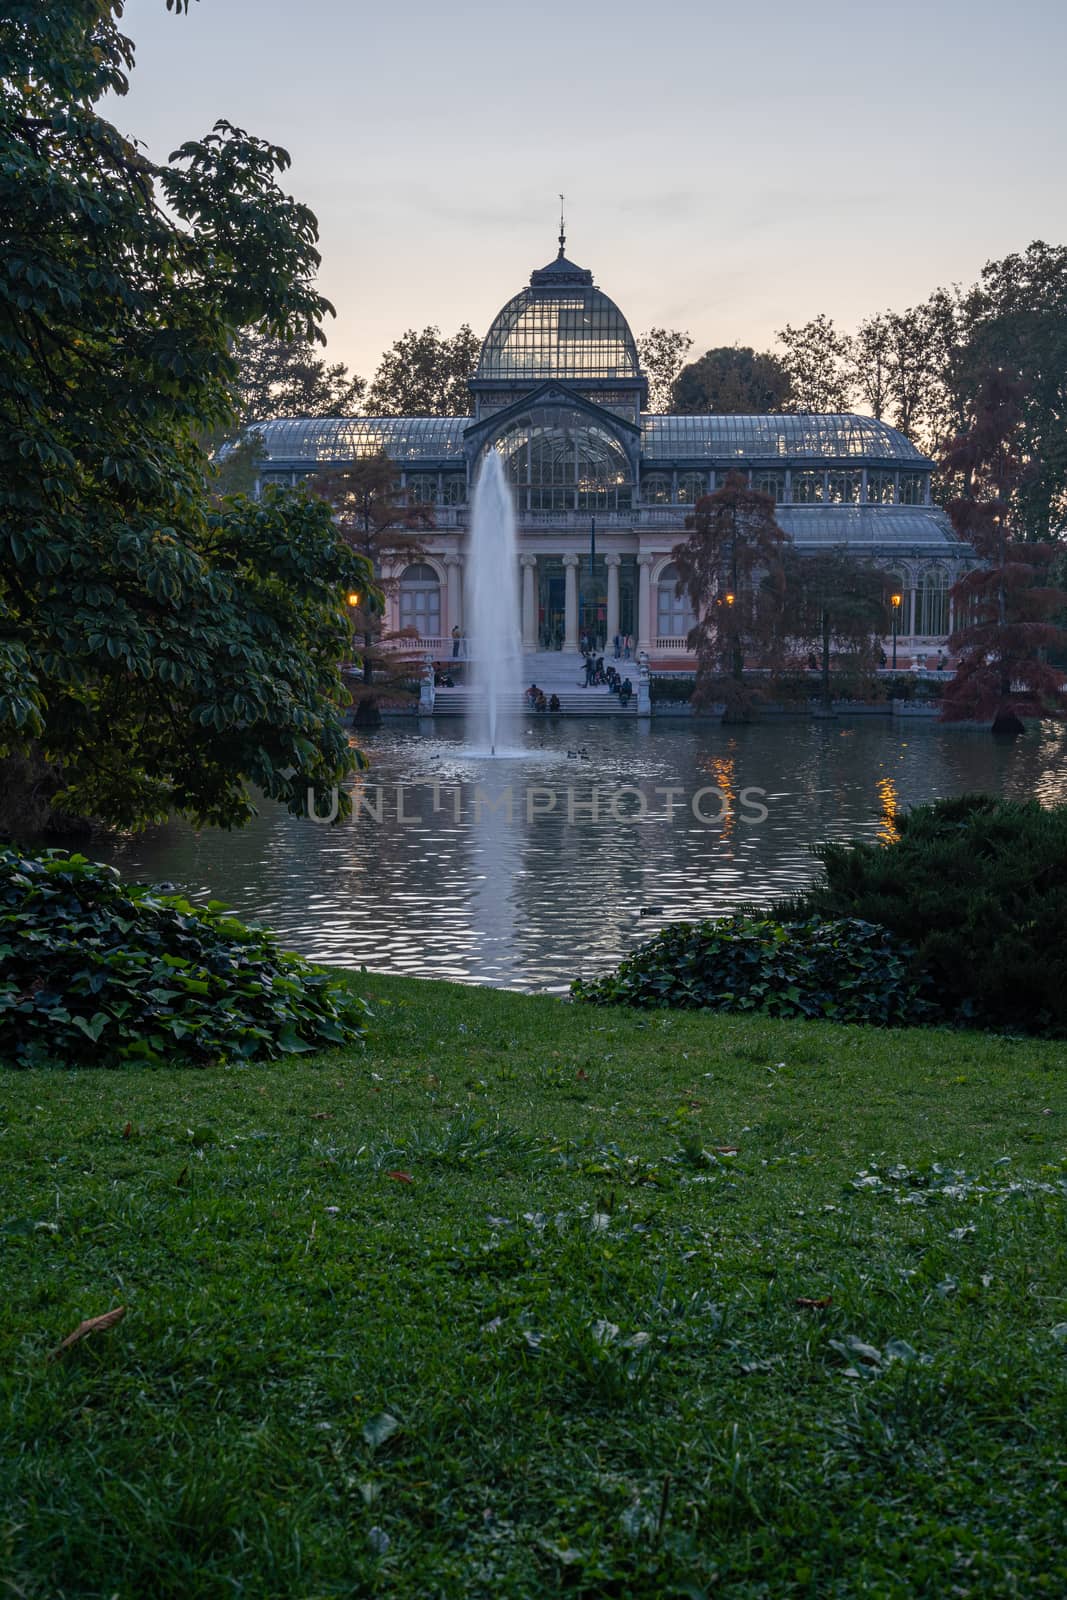 Sunset view of Crystal Palace or Palacio de cristal in Retiro Park in Madrid, Spain. by tanaonte